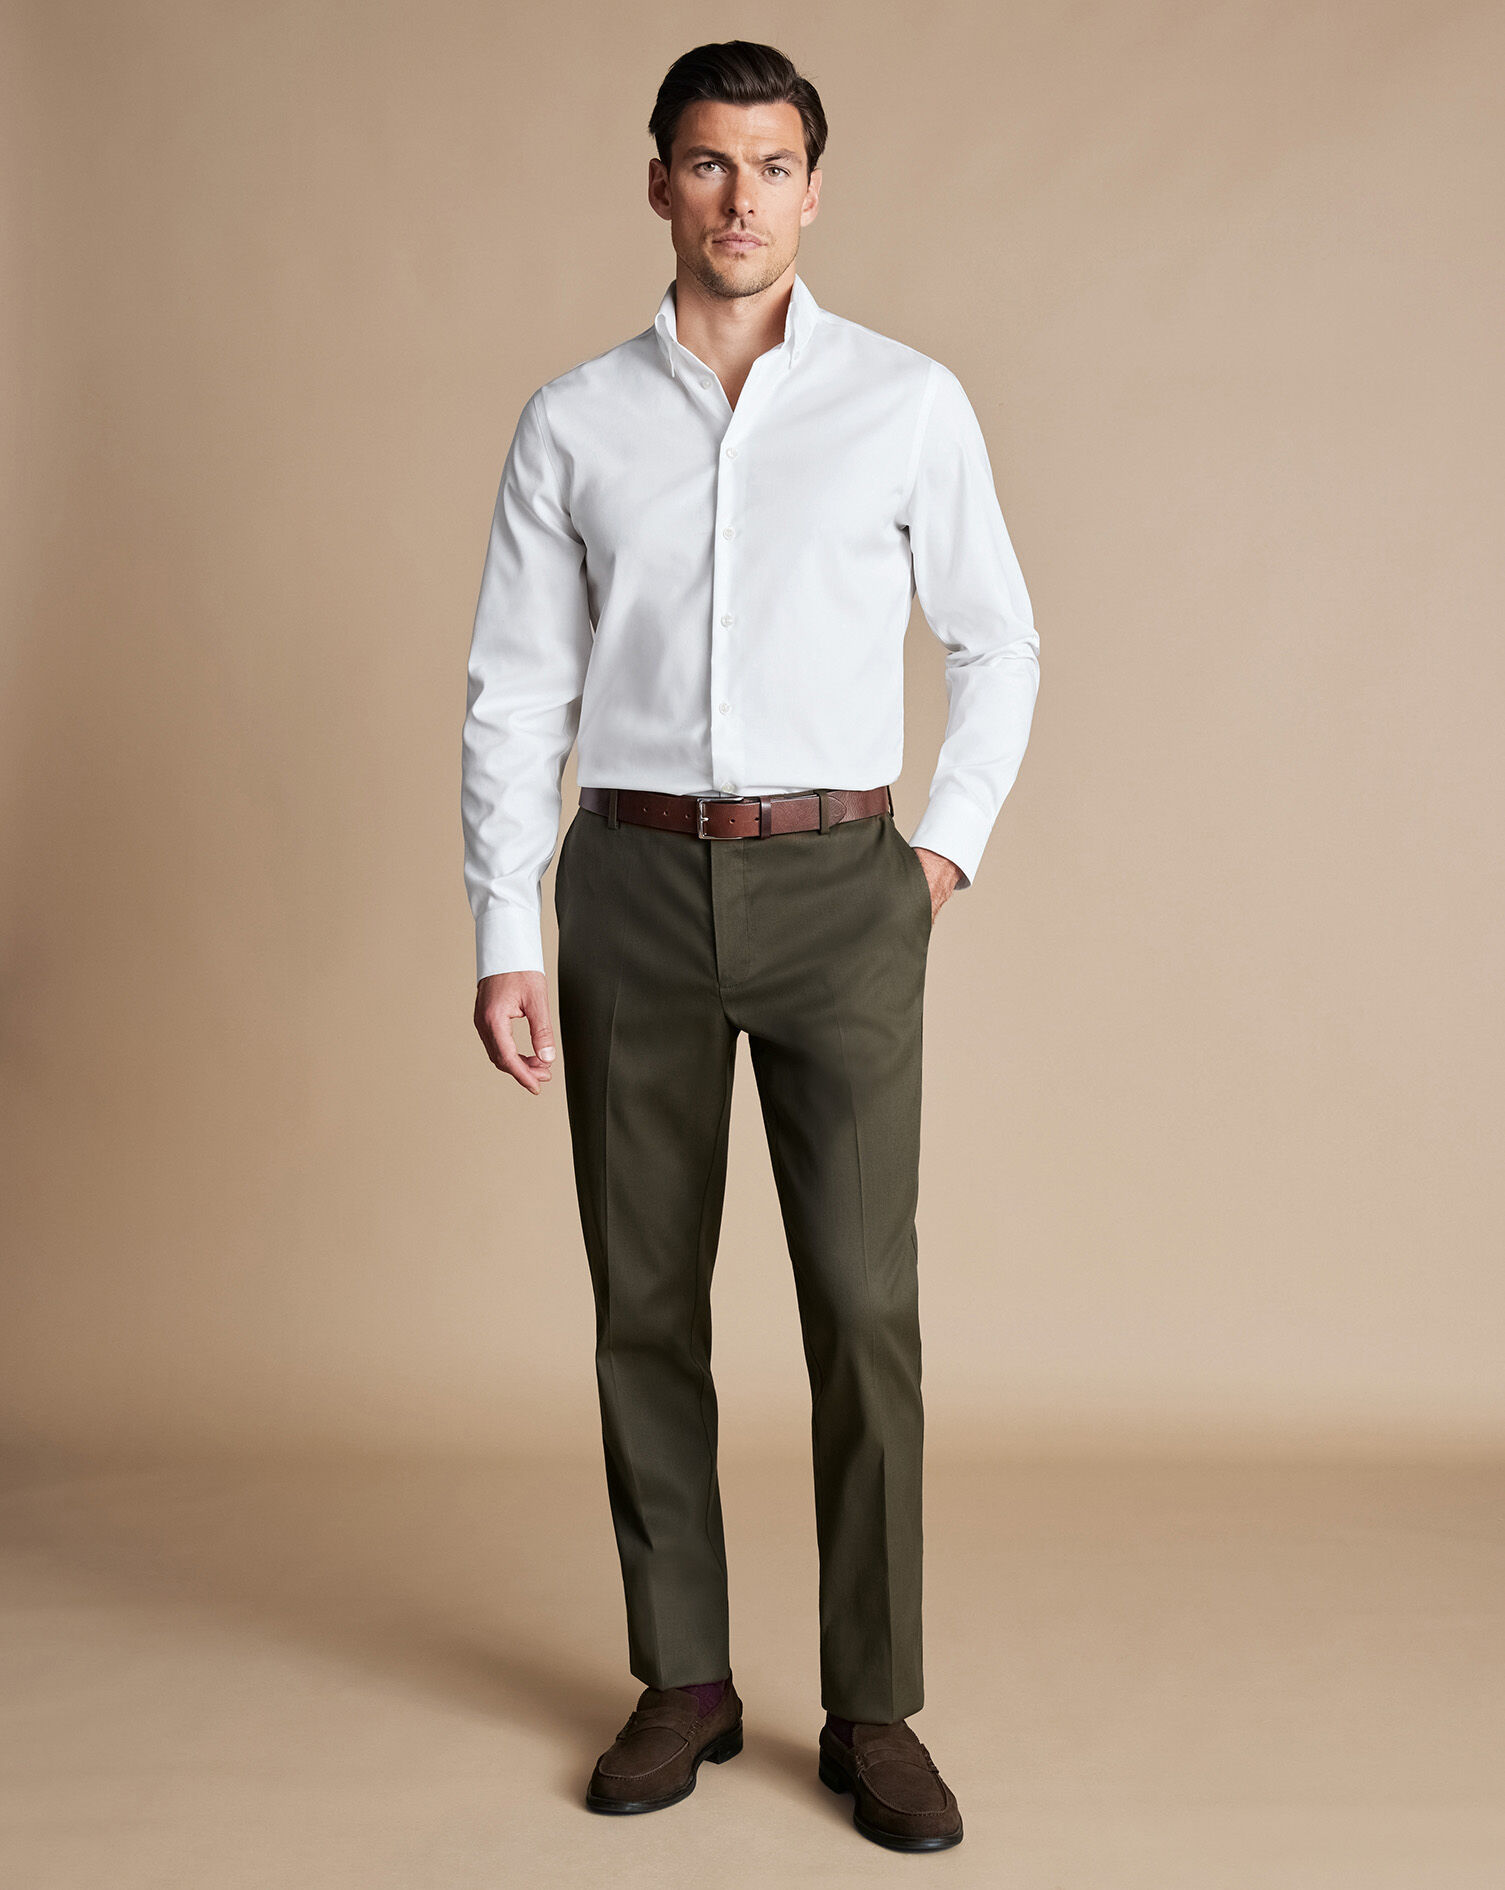 Which color top can go with green pants? - Quora